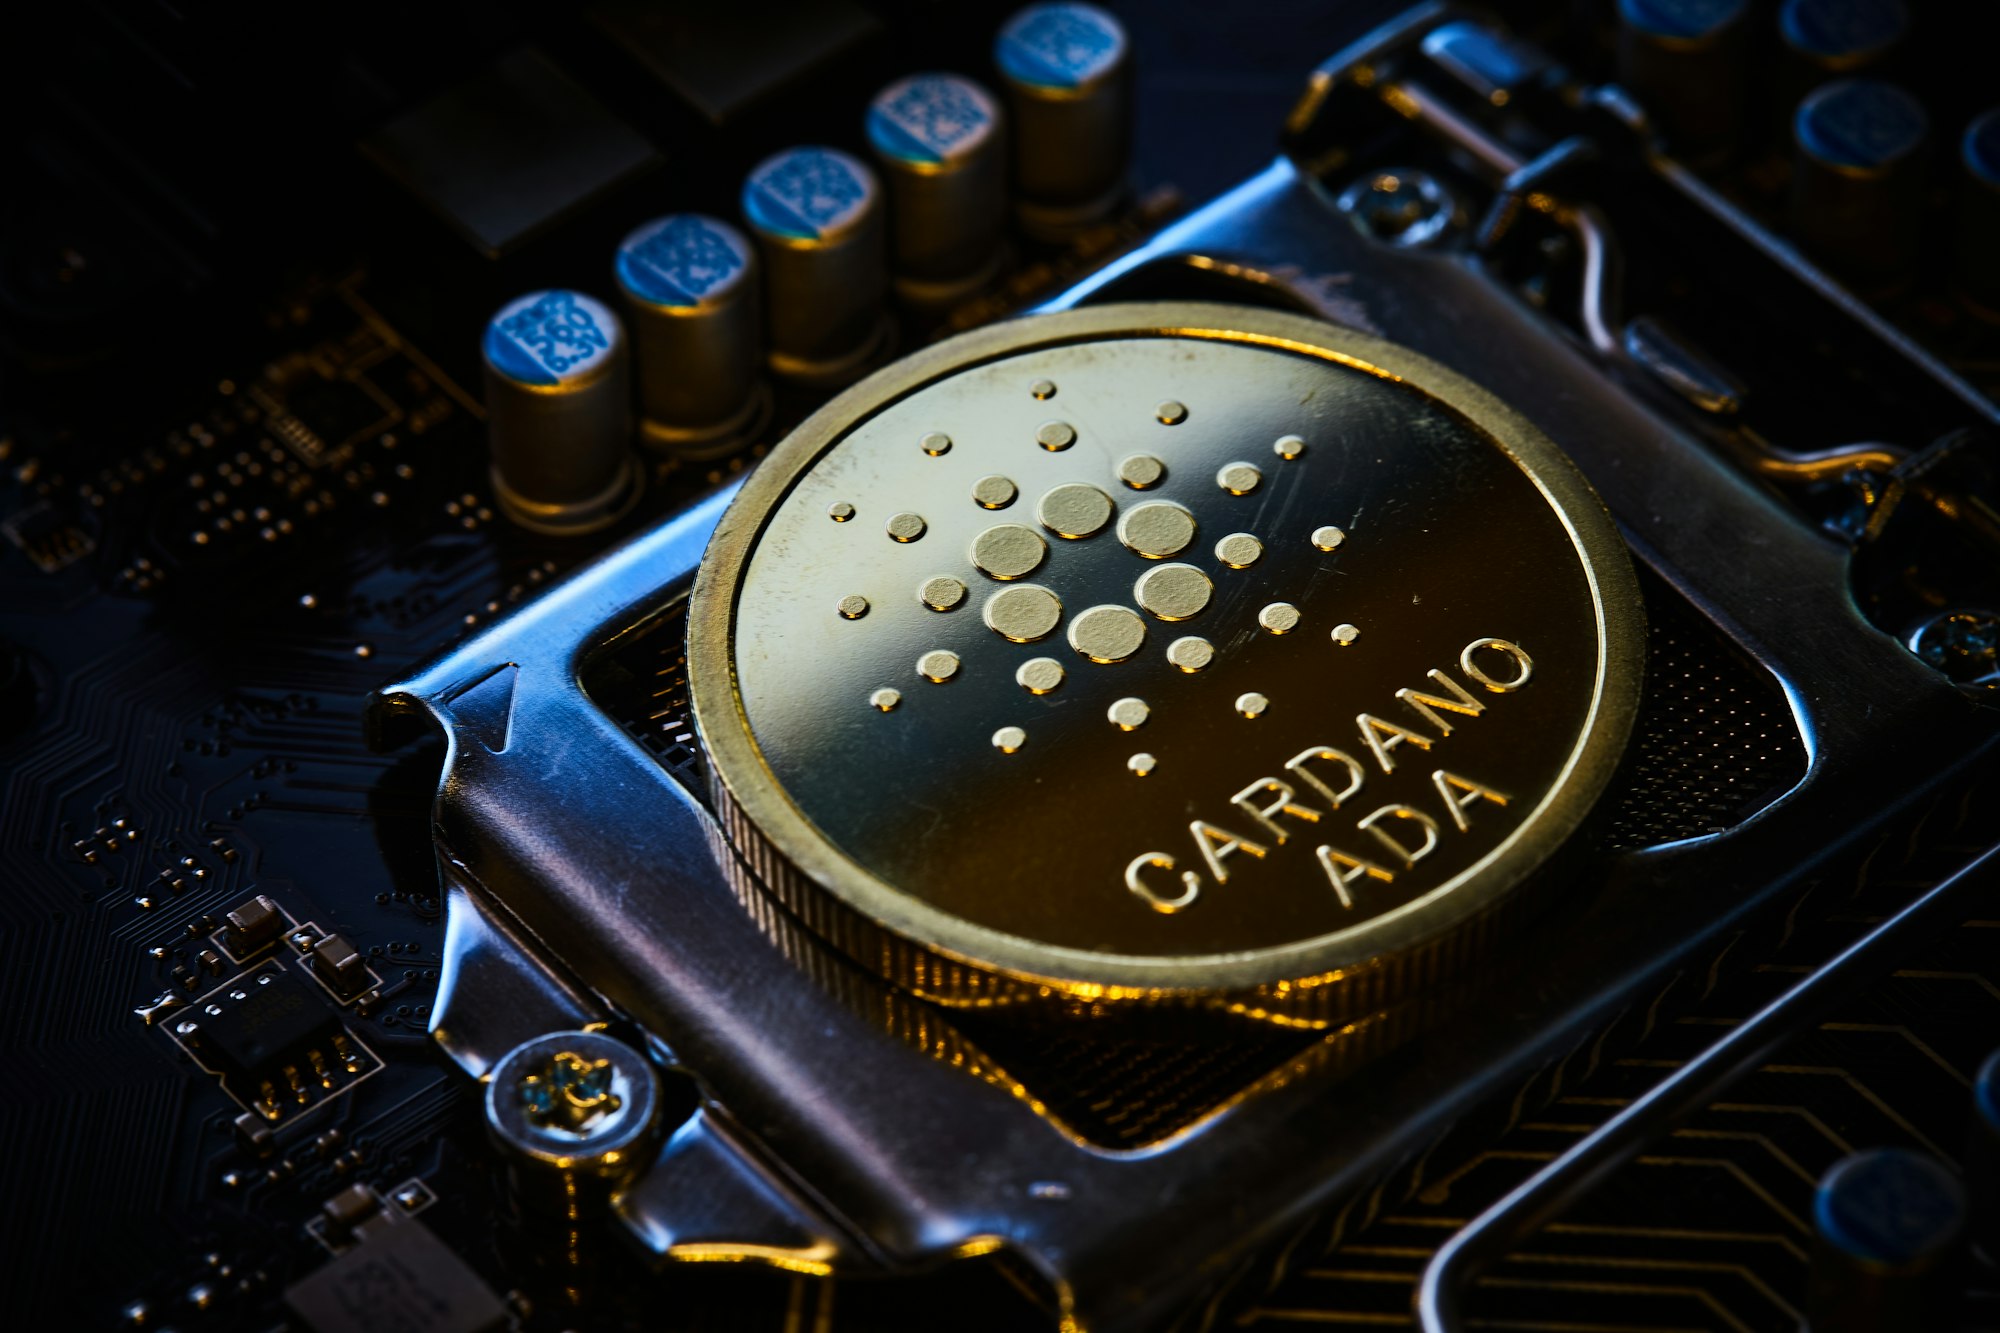 Cardano (ADA) is sought for its innovation and environmental concerns